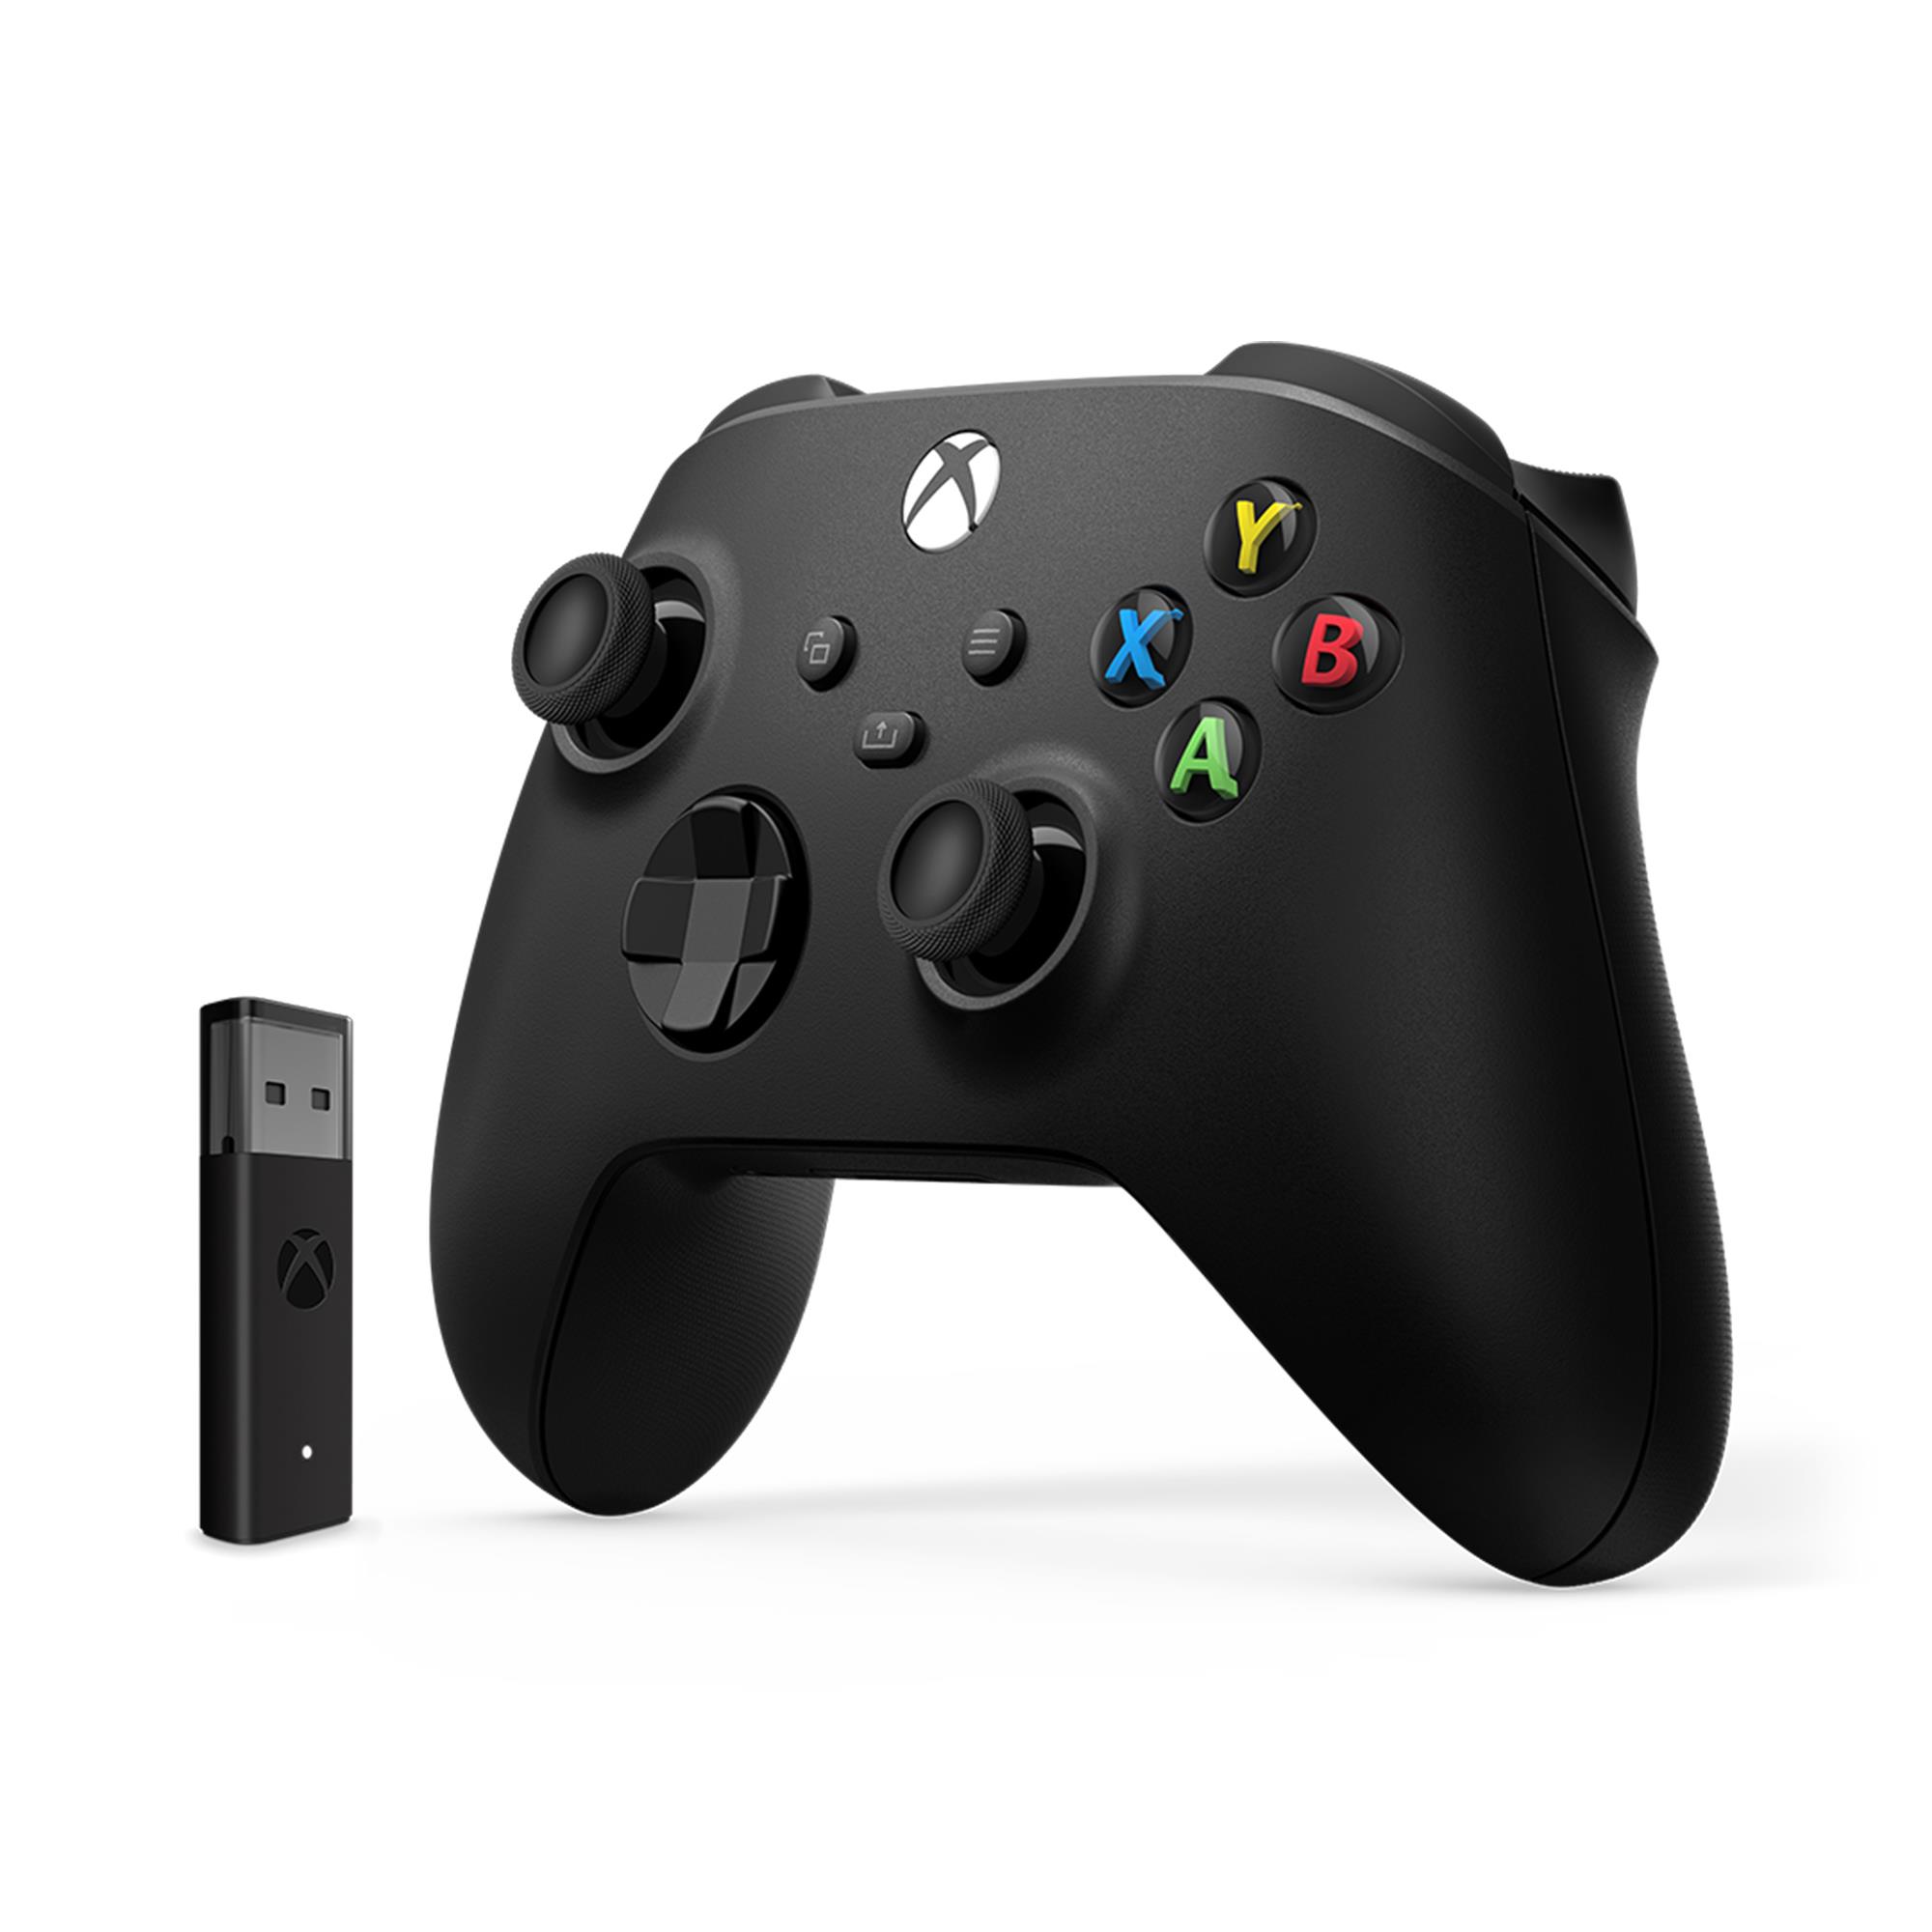 seamless-connection-xbox-one-controller-to-pc-with-dongle